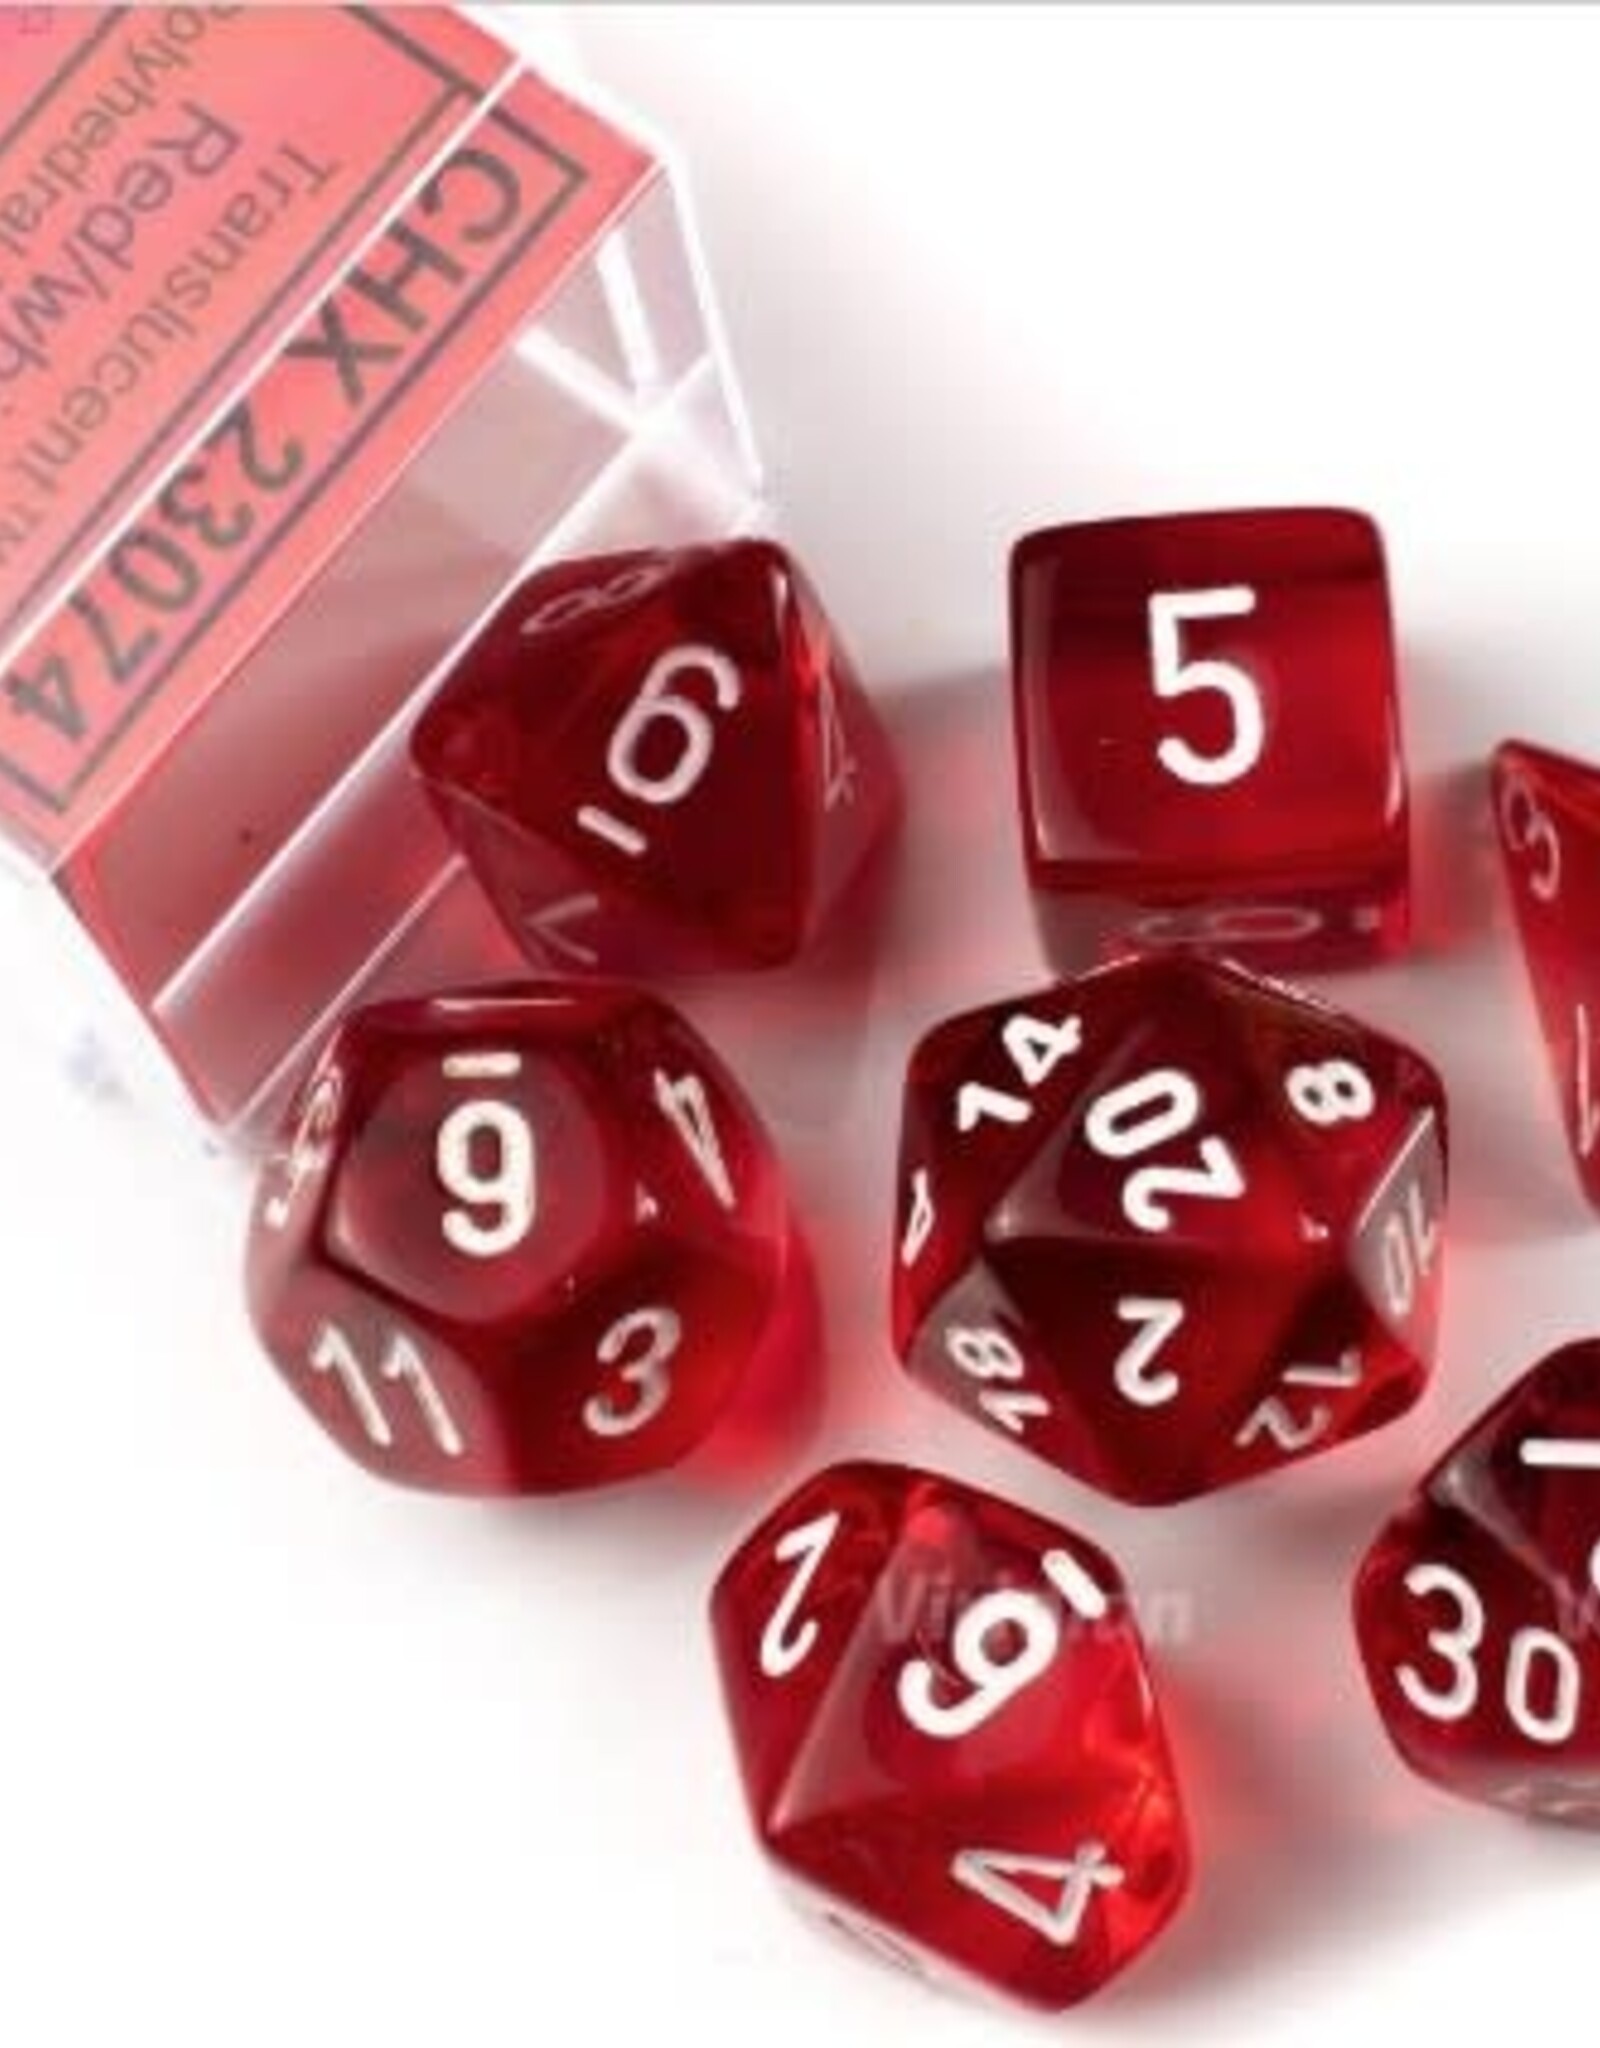 Chessex Dice - 7pc Translucent Red & White Polyhedral